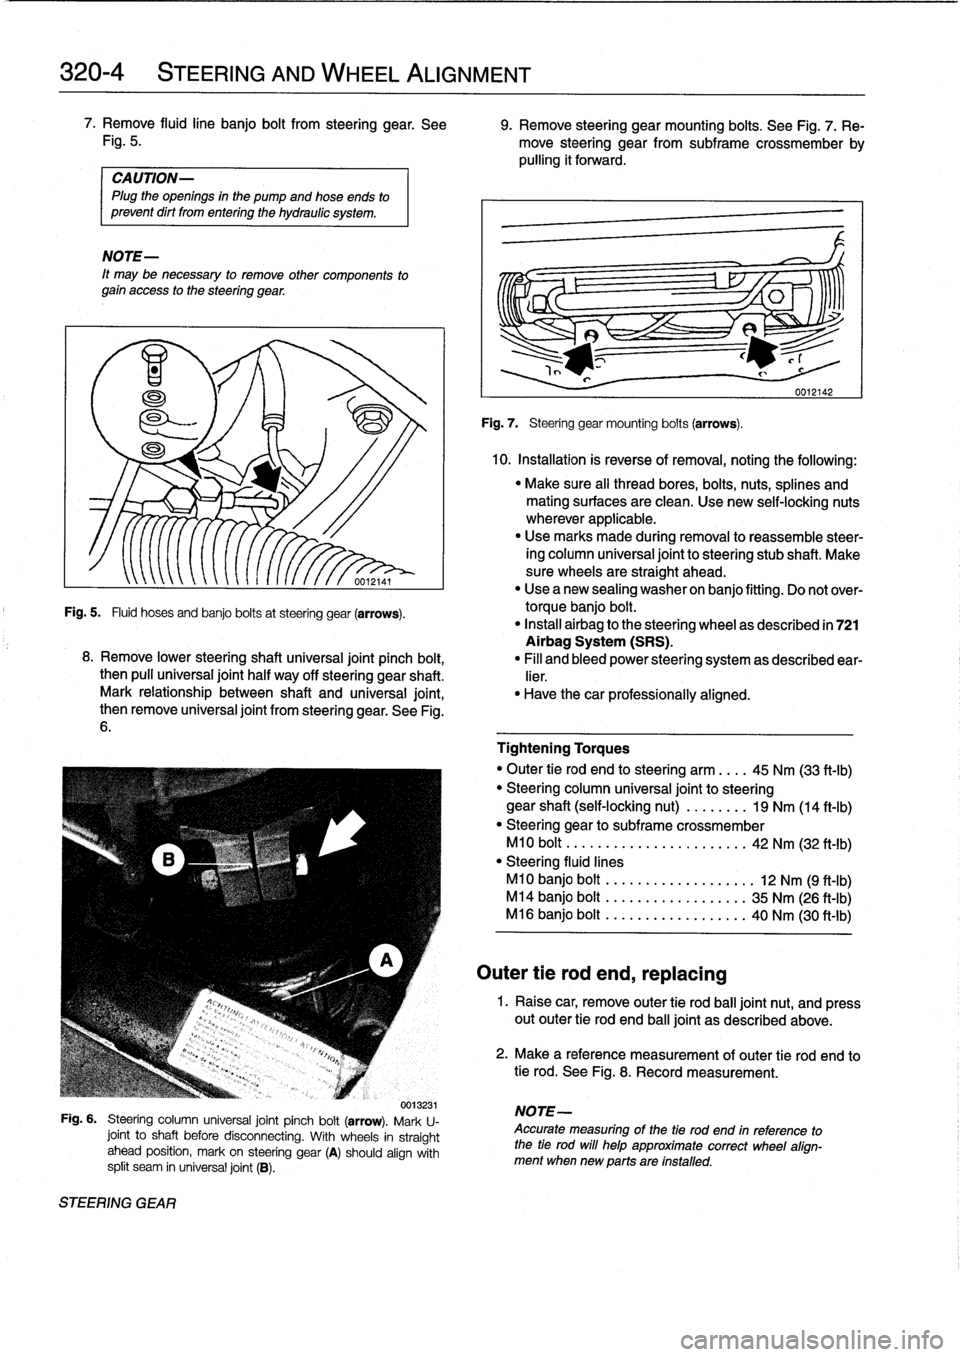 BMW 323i 1995 E36 Workshop Manual 
320-
4

	

STEERING
AND
WHEEL
ALIGNMENT

7
.
Remove
fluidline
banjo
bolt
from
steering
gear
.
See

	

9
.
Remove
steering
gearmounting
bolts
.
See
Fig
.
7
.
Re
Fig
.
5
.

	

move
steering
gear
from
s